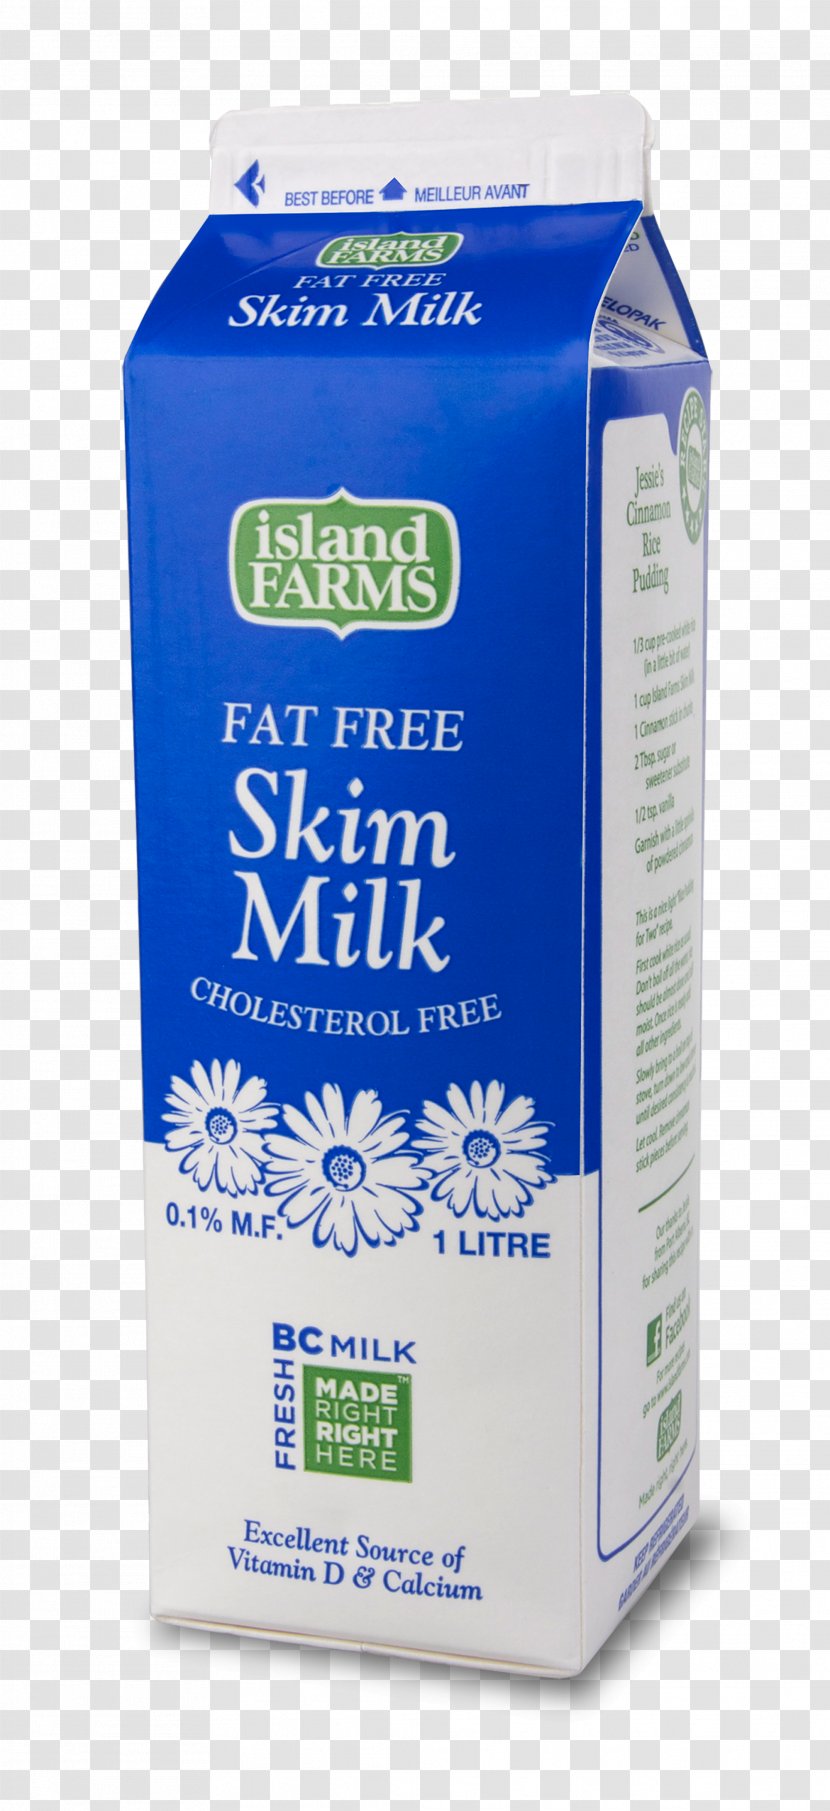 Product Ingredient Agropur Cooperative (Island Farms) LiquidM - Island Farms - Dairy Milk Bottles Transparent PNG